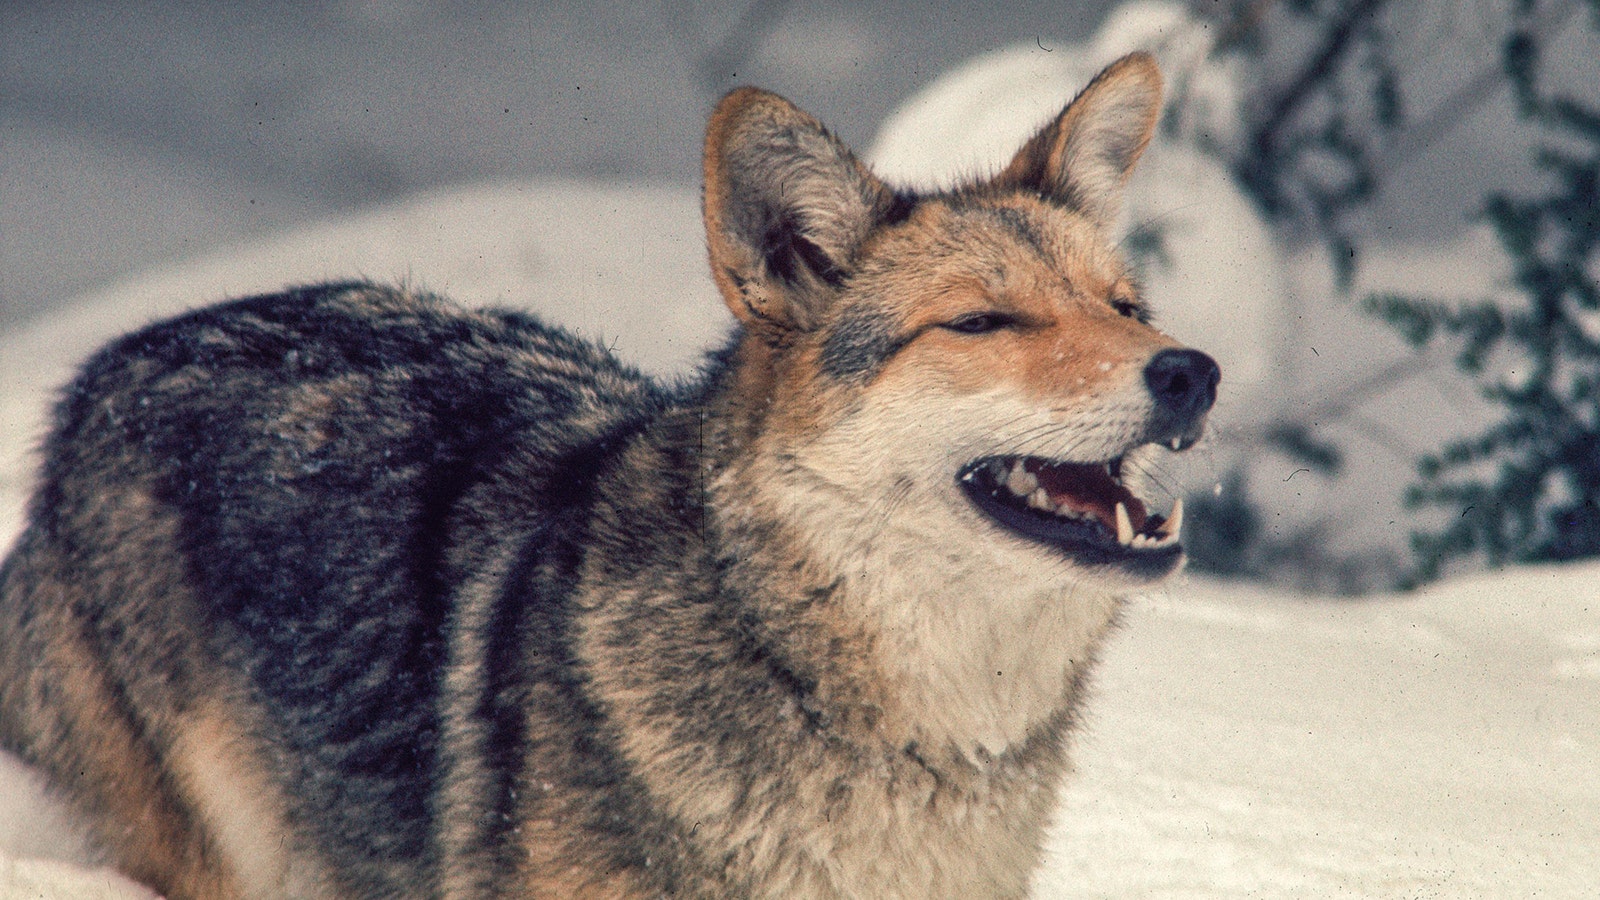 Eastern coyotes, commonly called “coywolves,” have mixed DNA from coyotes, wolves and sometimes even domestic dogs. They’re larger than Wyoming coyotes.